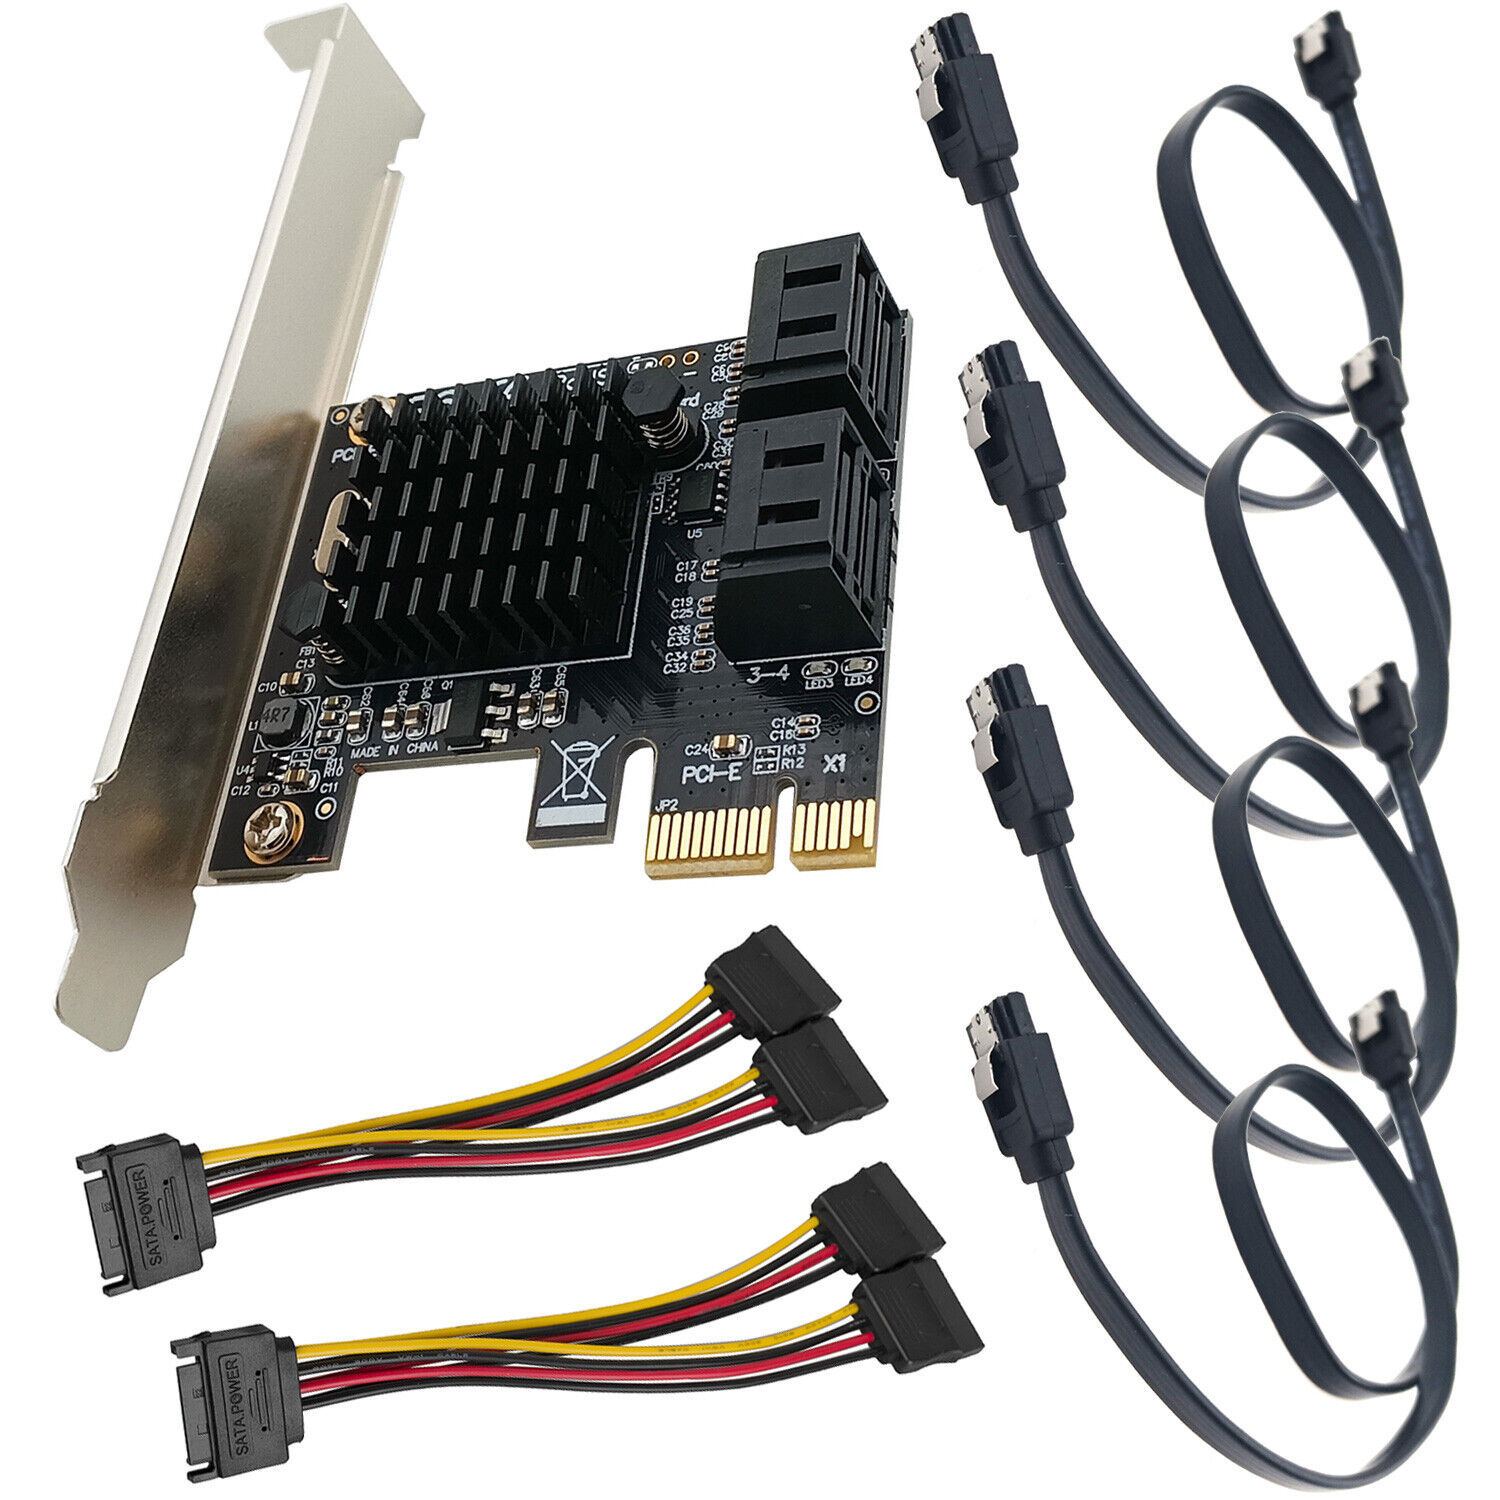 PCI-e X1 to SATA 3.0 Expansion Card 4 Port Controller Adapter Data Power Cable